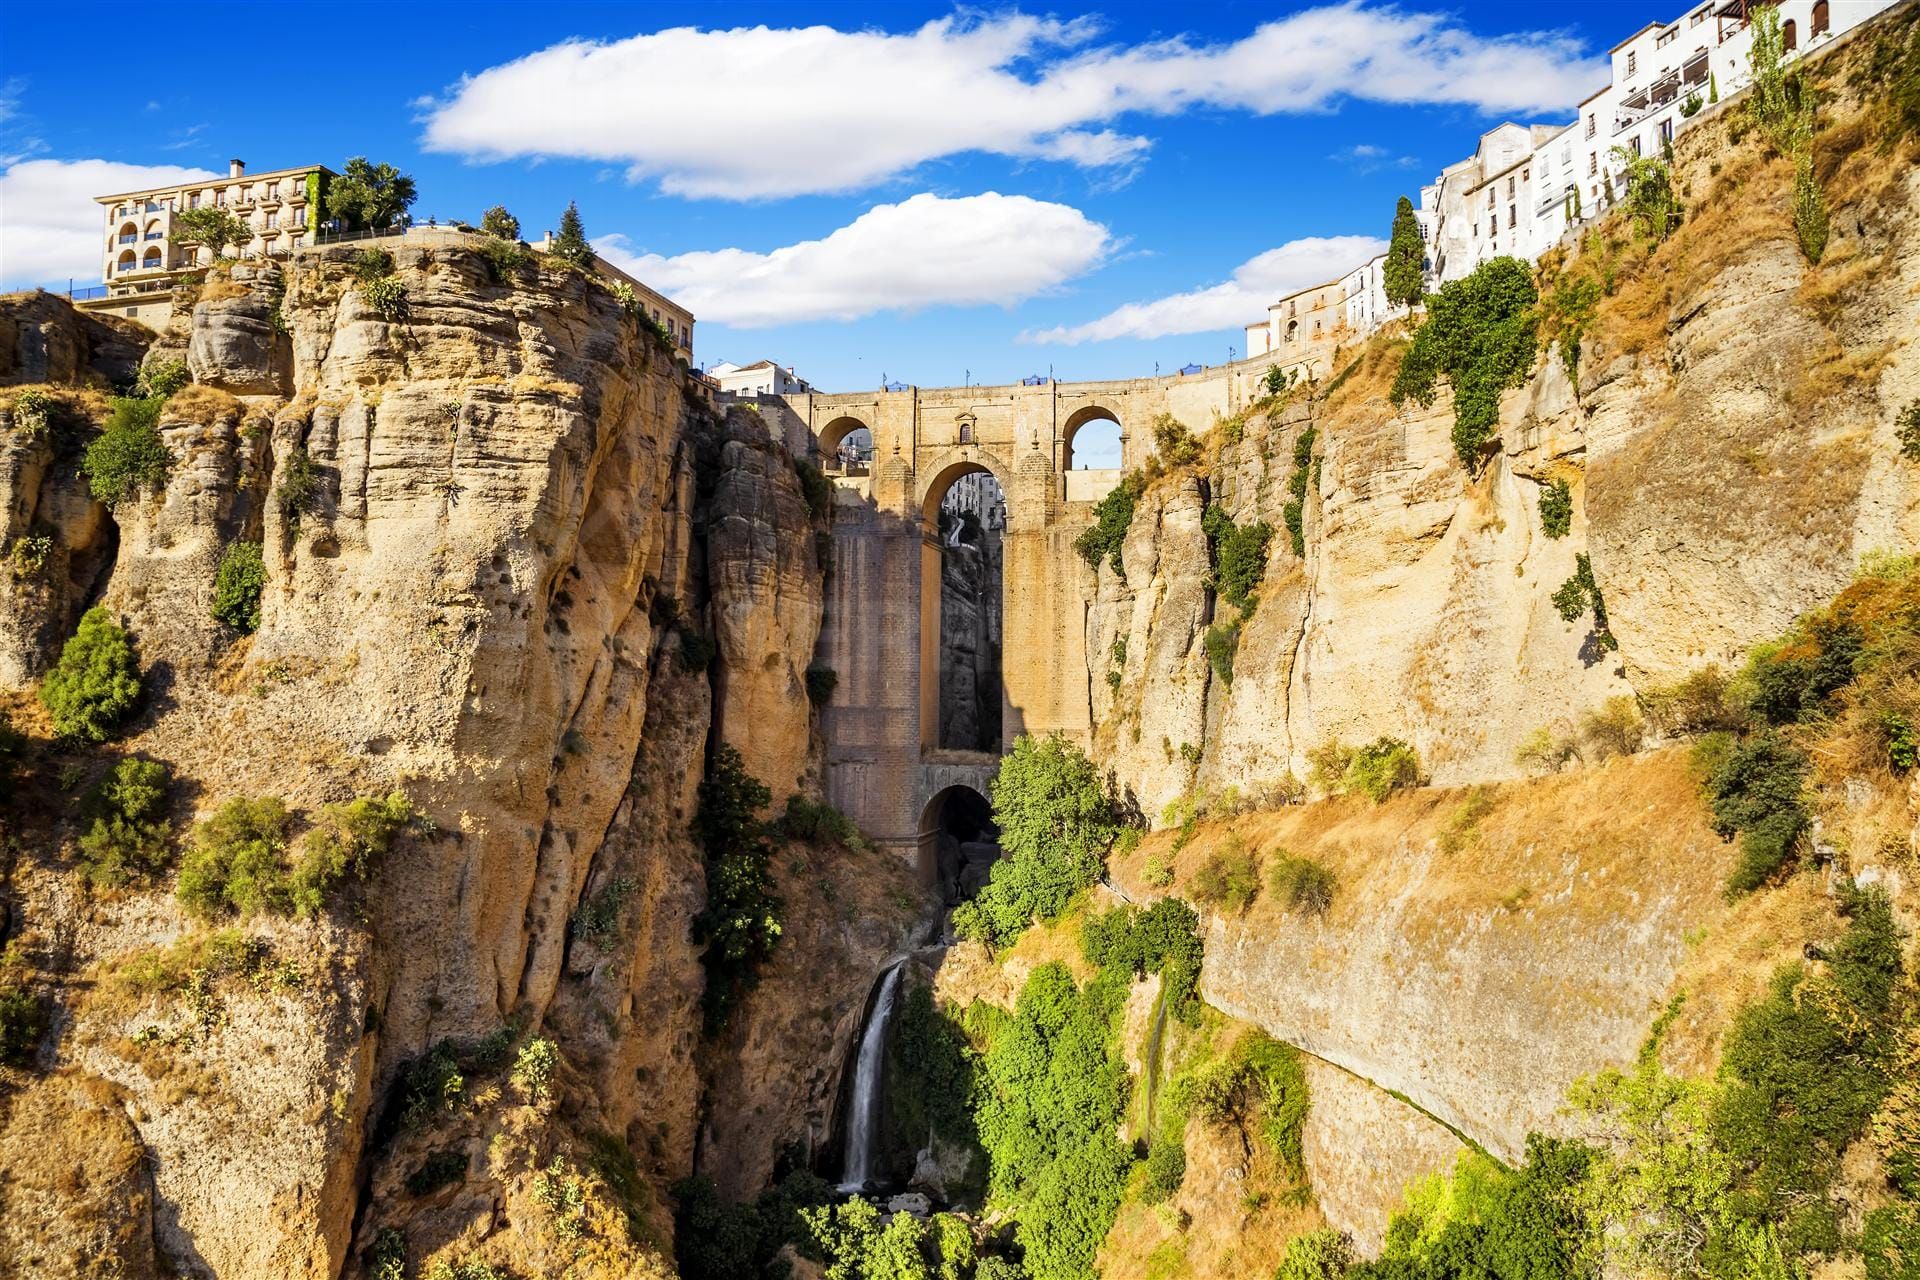 A guide to walking in Ronda